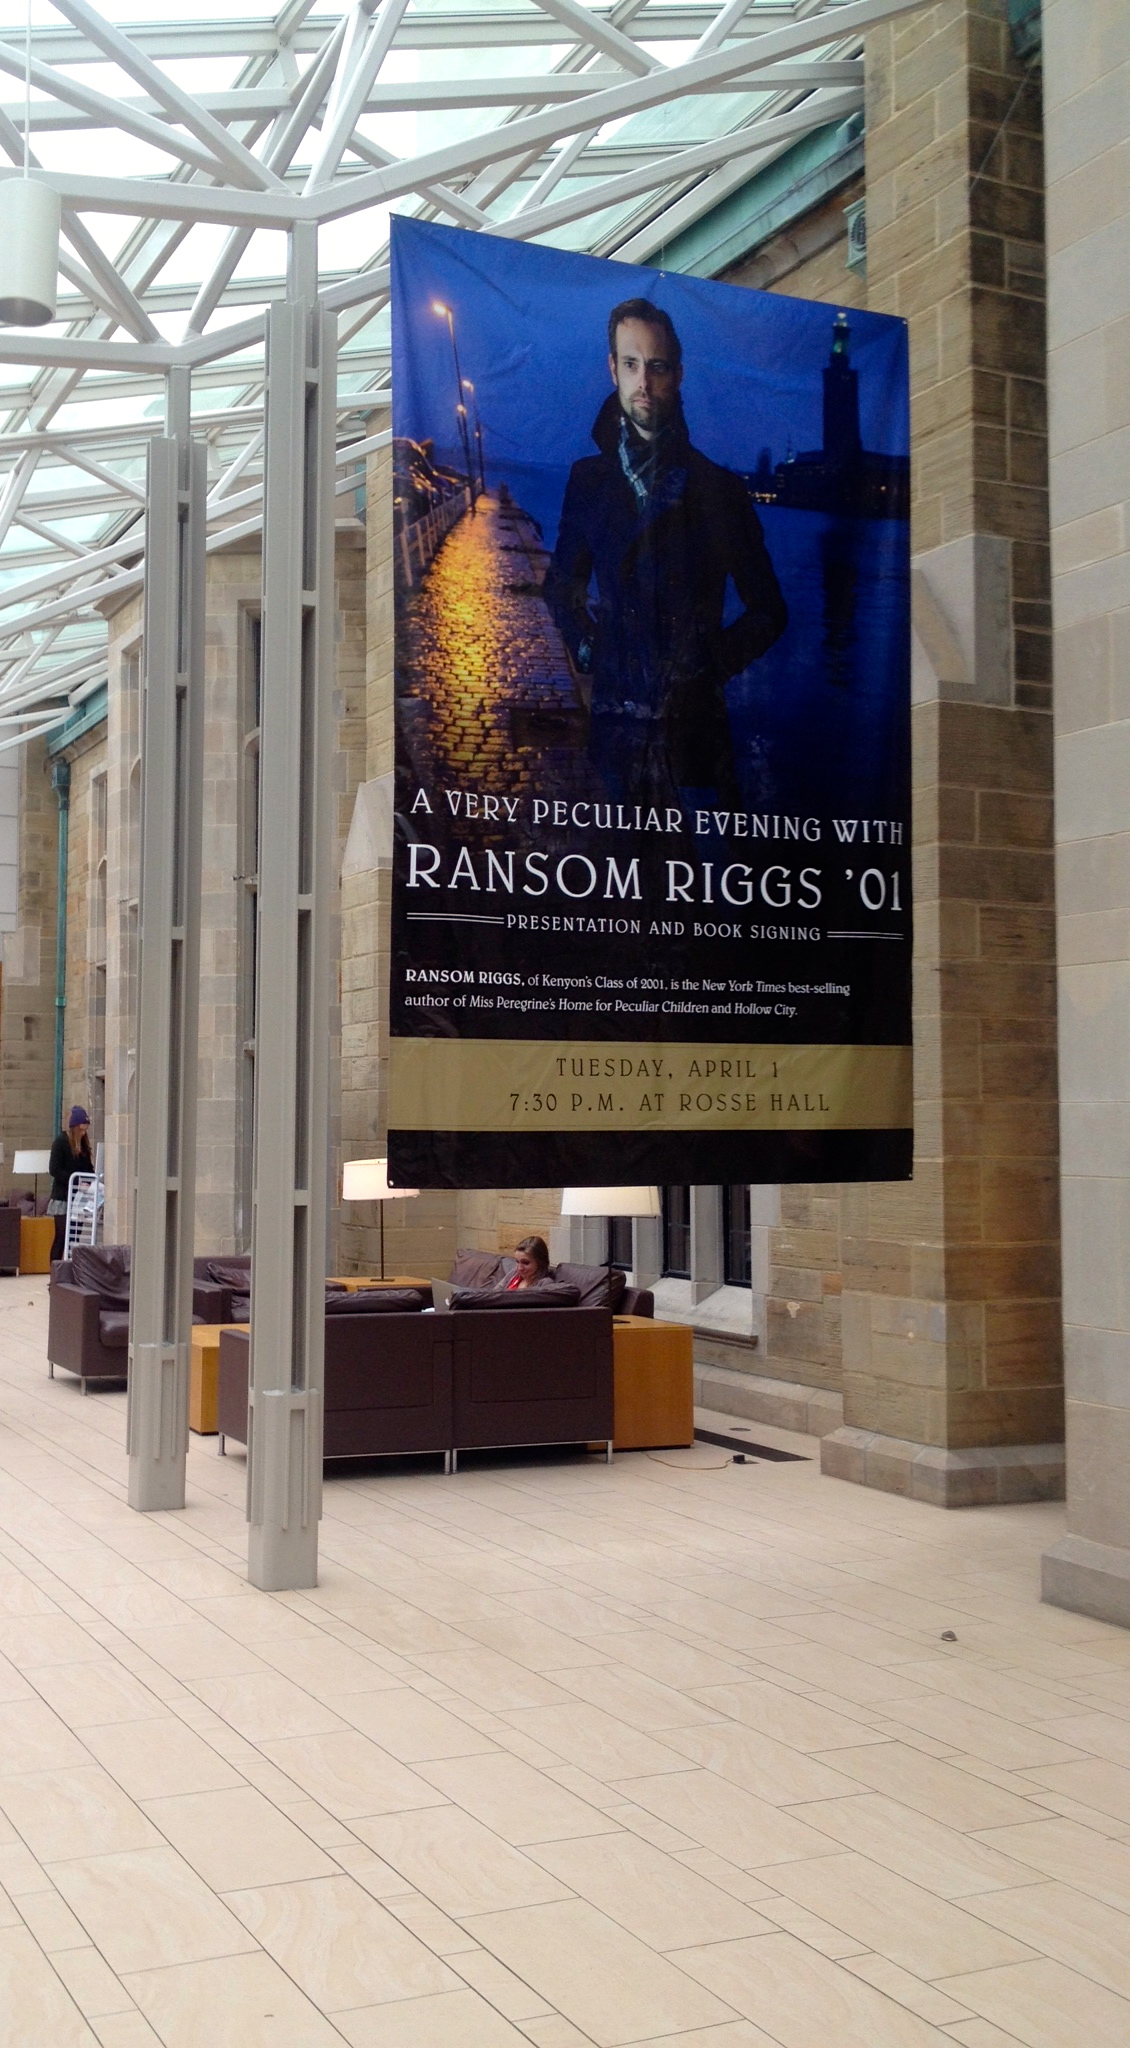 Ransom Riggs poster in Peirce. (Photo credit: Spencer Kaye '14)